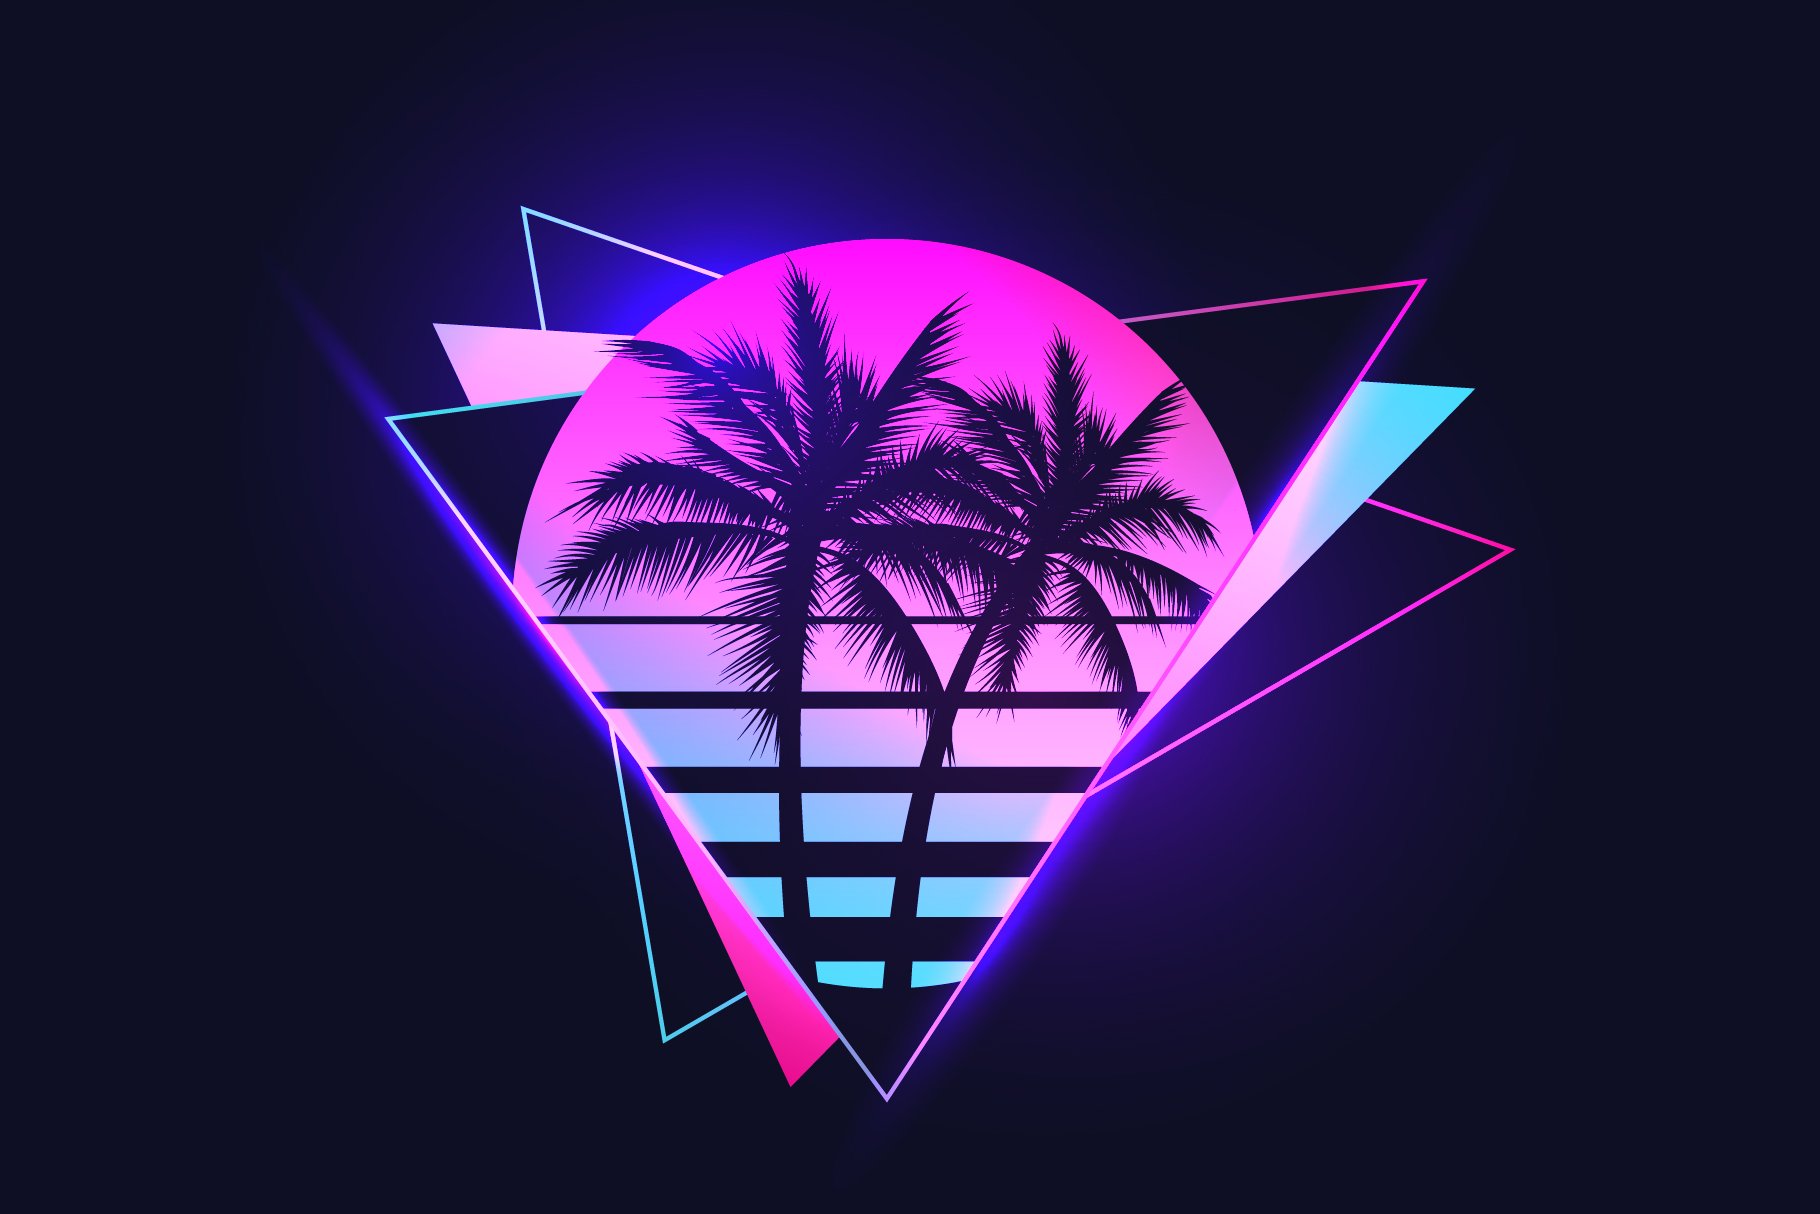 Vaporwave sunset with palms cover image.